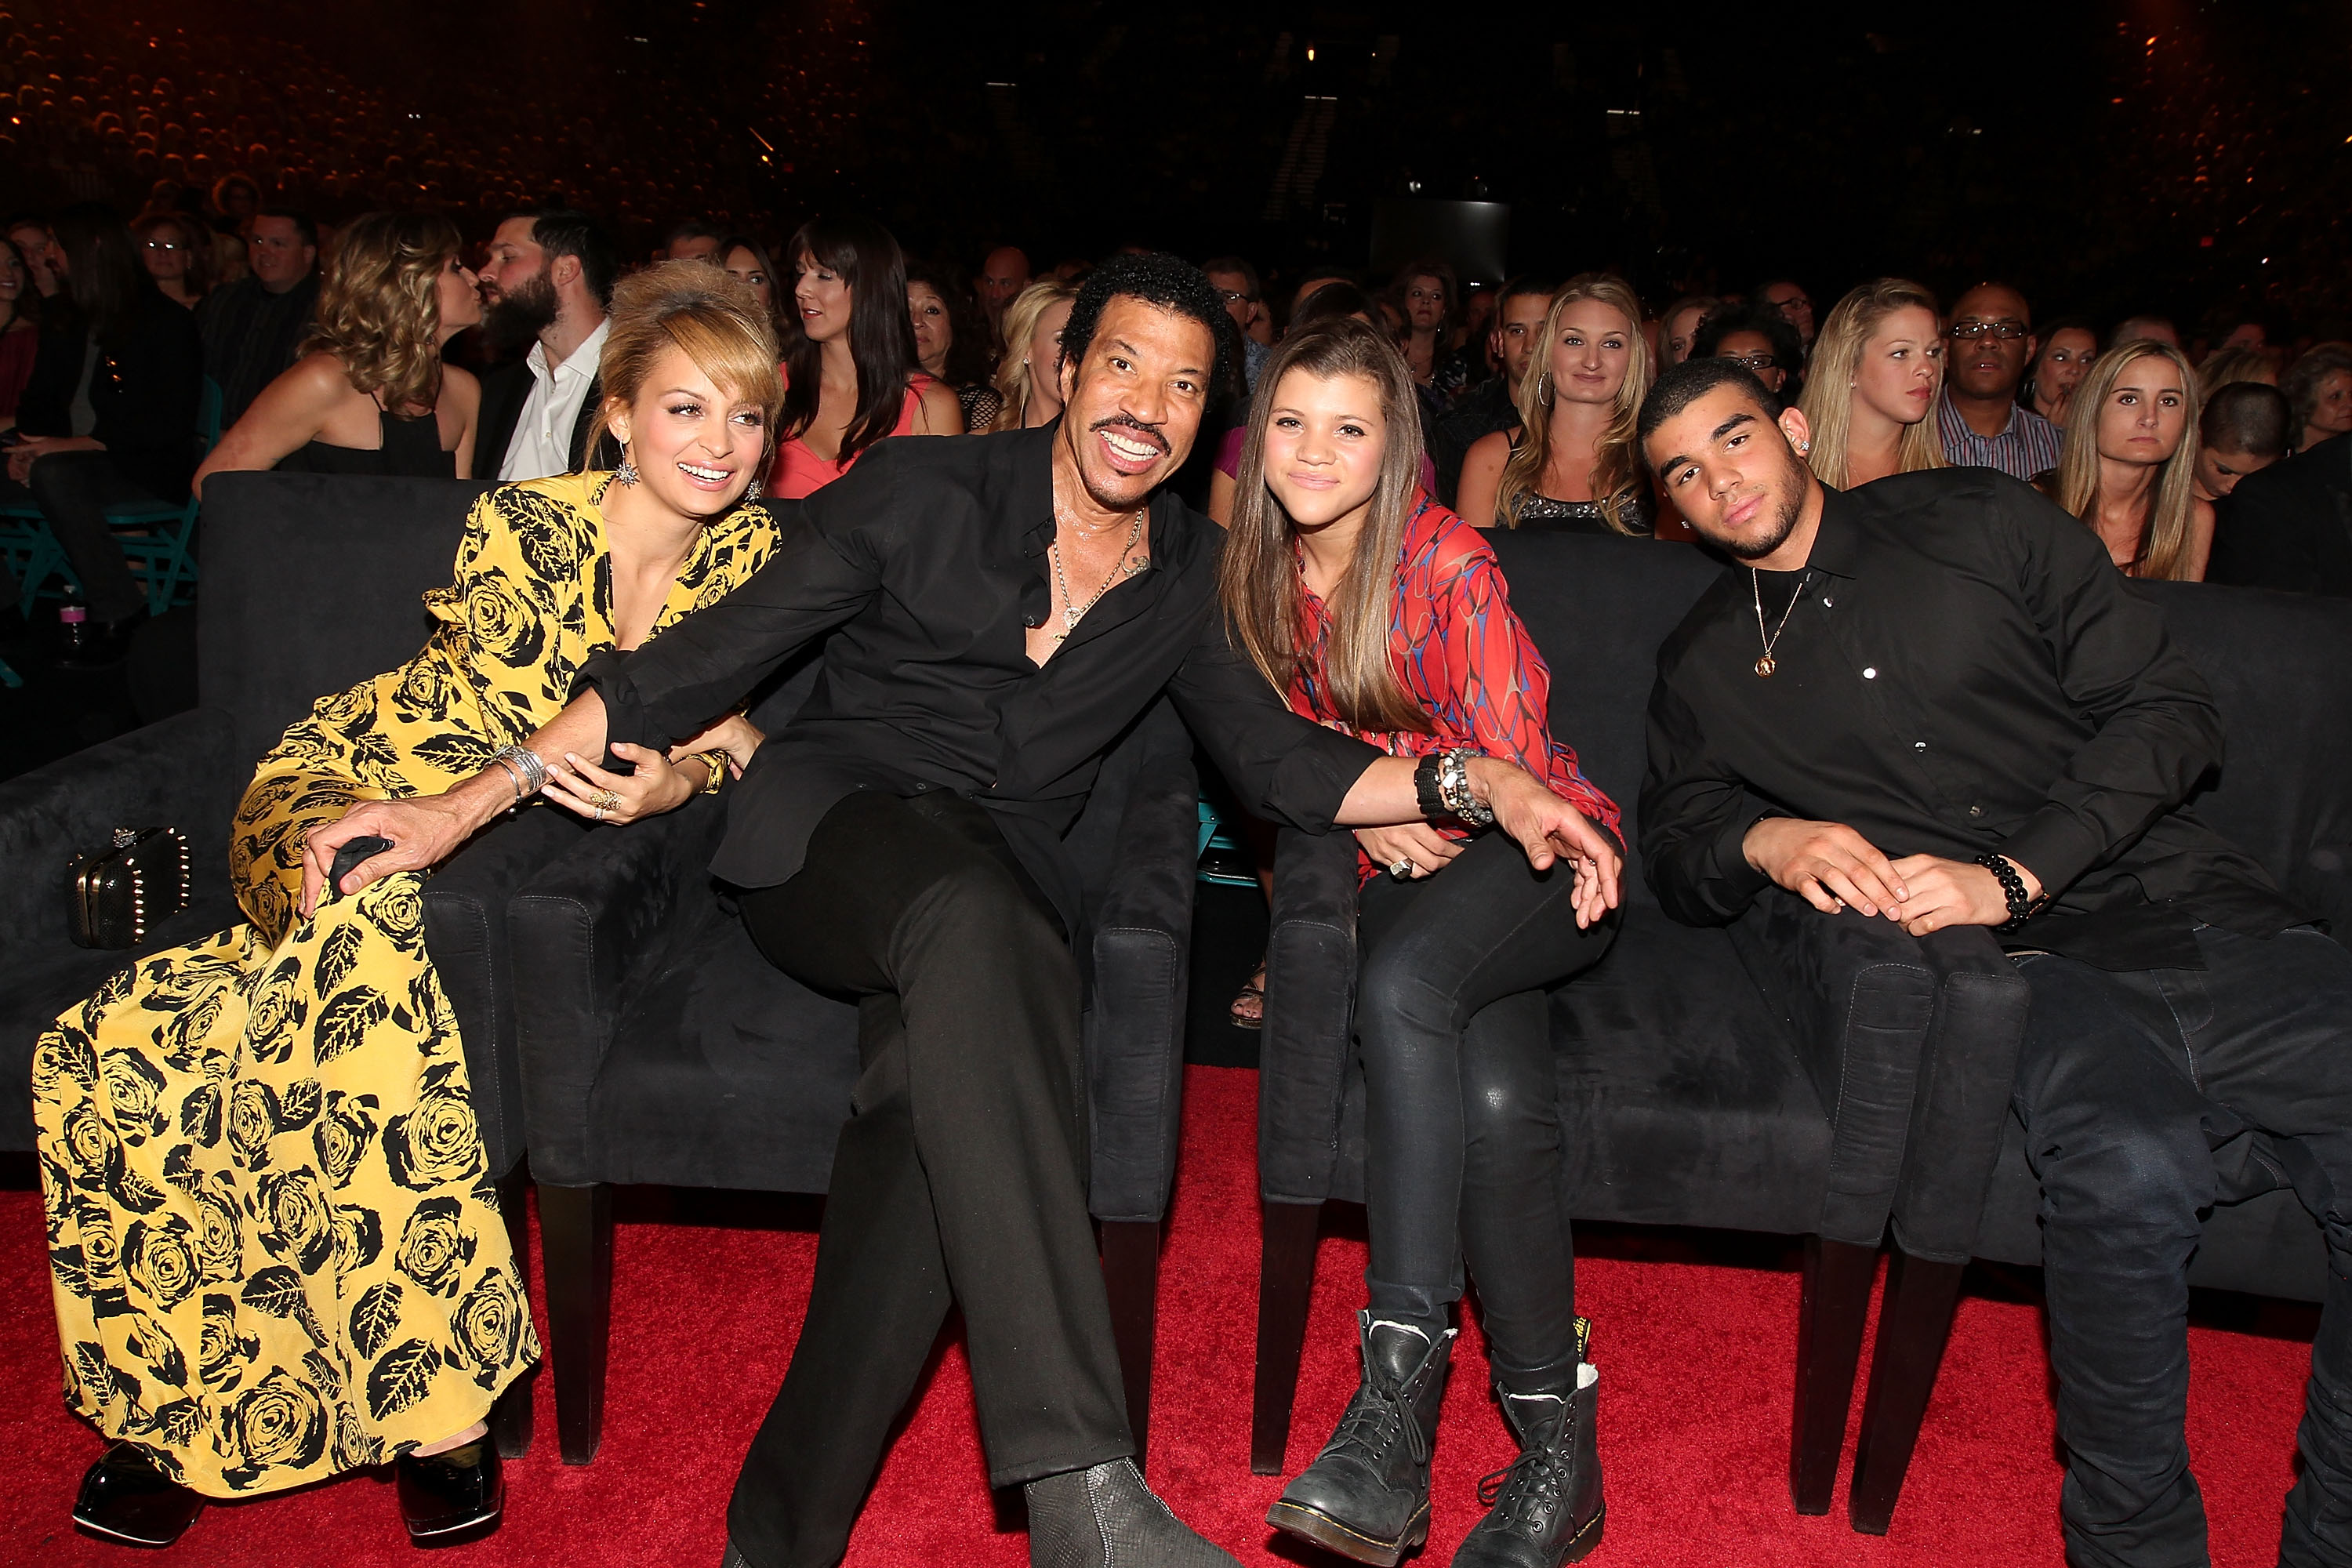 Nicole Richie, Lionel Richie, Sofia Richie and Miles Richie attend Lionel Richie and Friends in Concert at the MGM Grand Garden Arena on April 2, 2012 in Las Vegas, Nevada. | Source: Getty Images